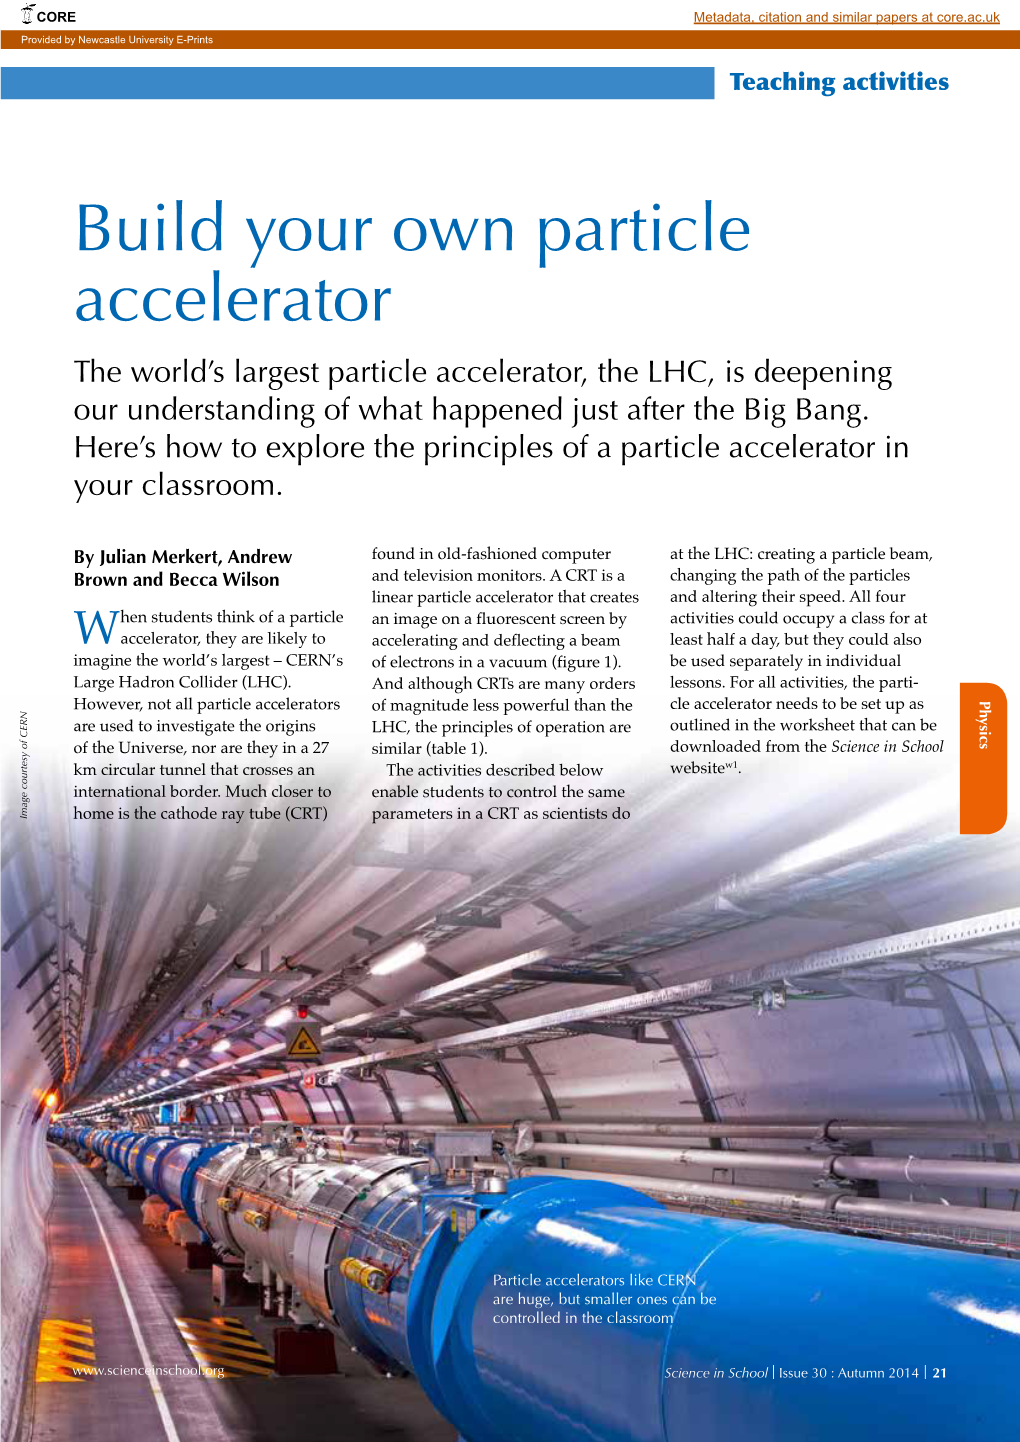 Build Your Own Particle Accelerator